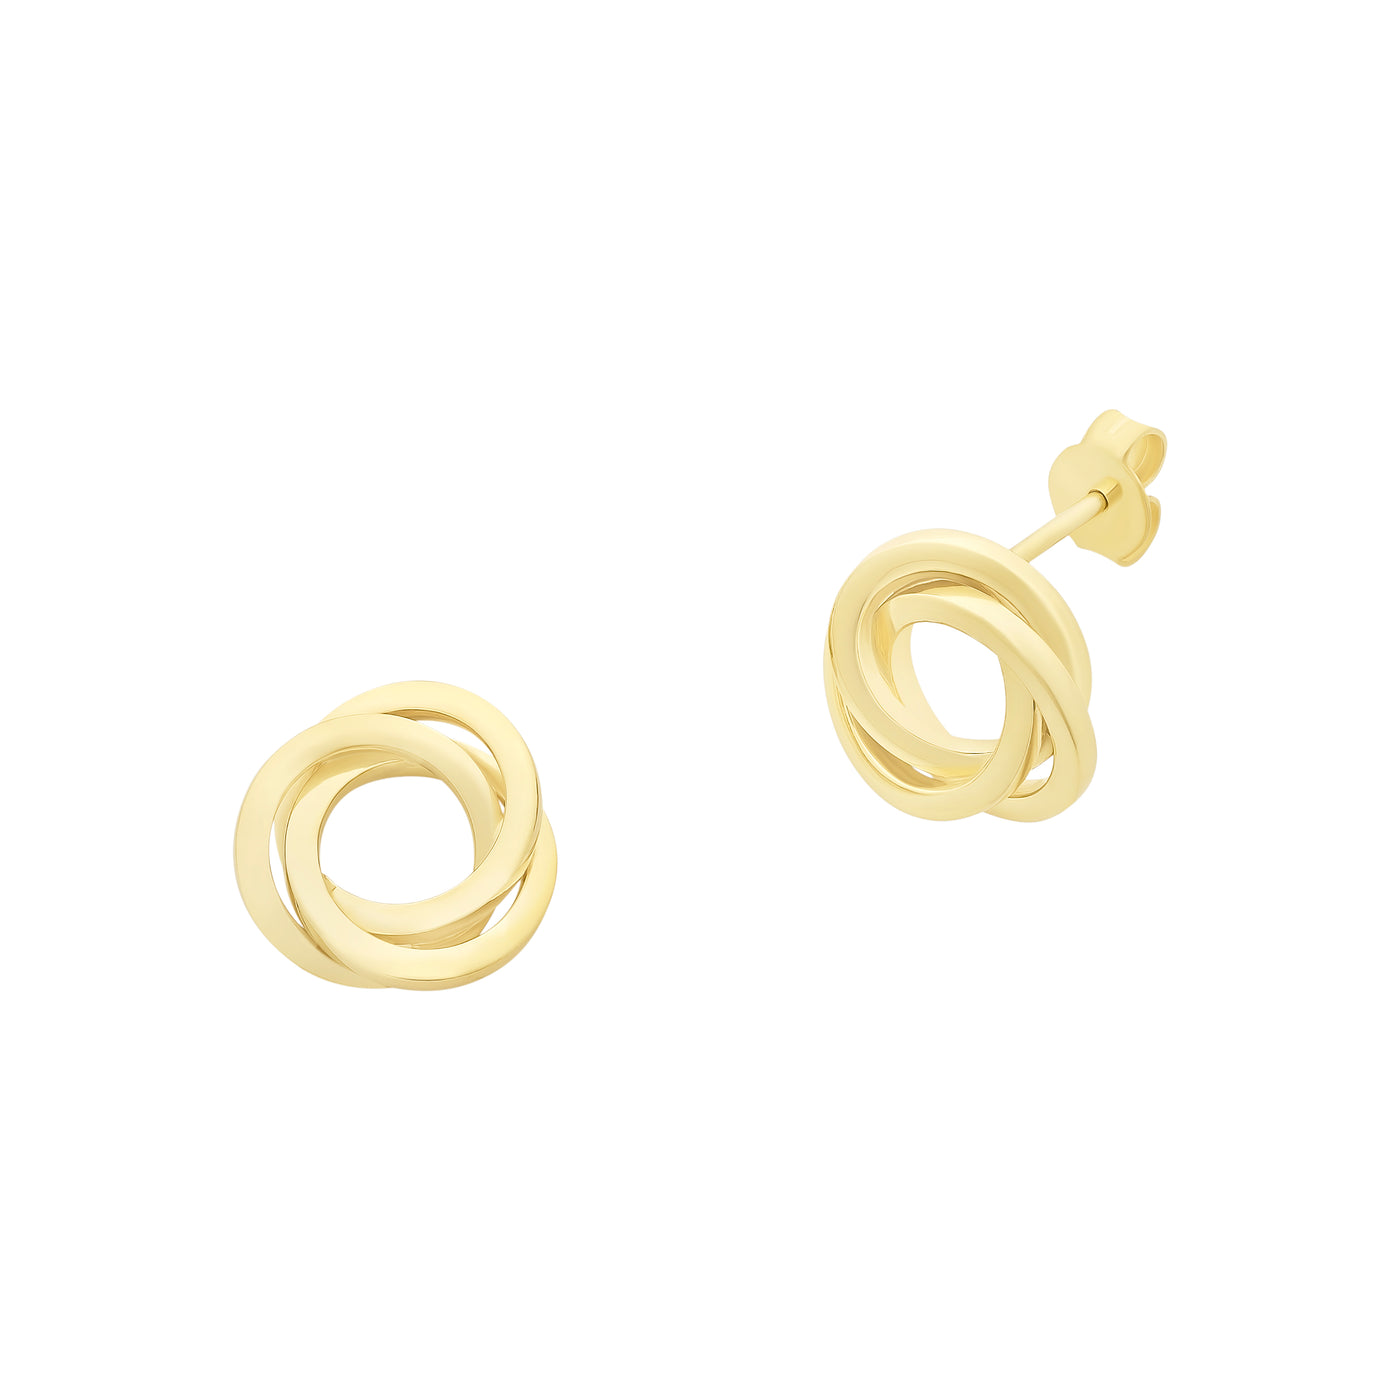 9Ct Gold Silver Filled Swirl Circle Stud Earrings